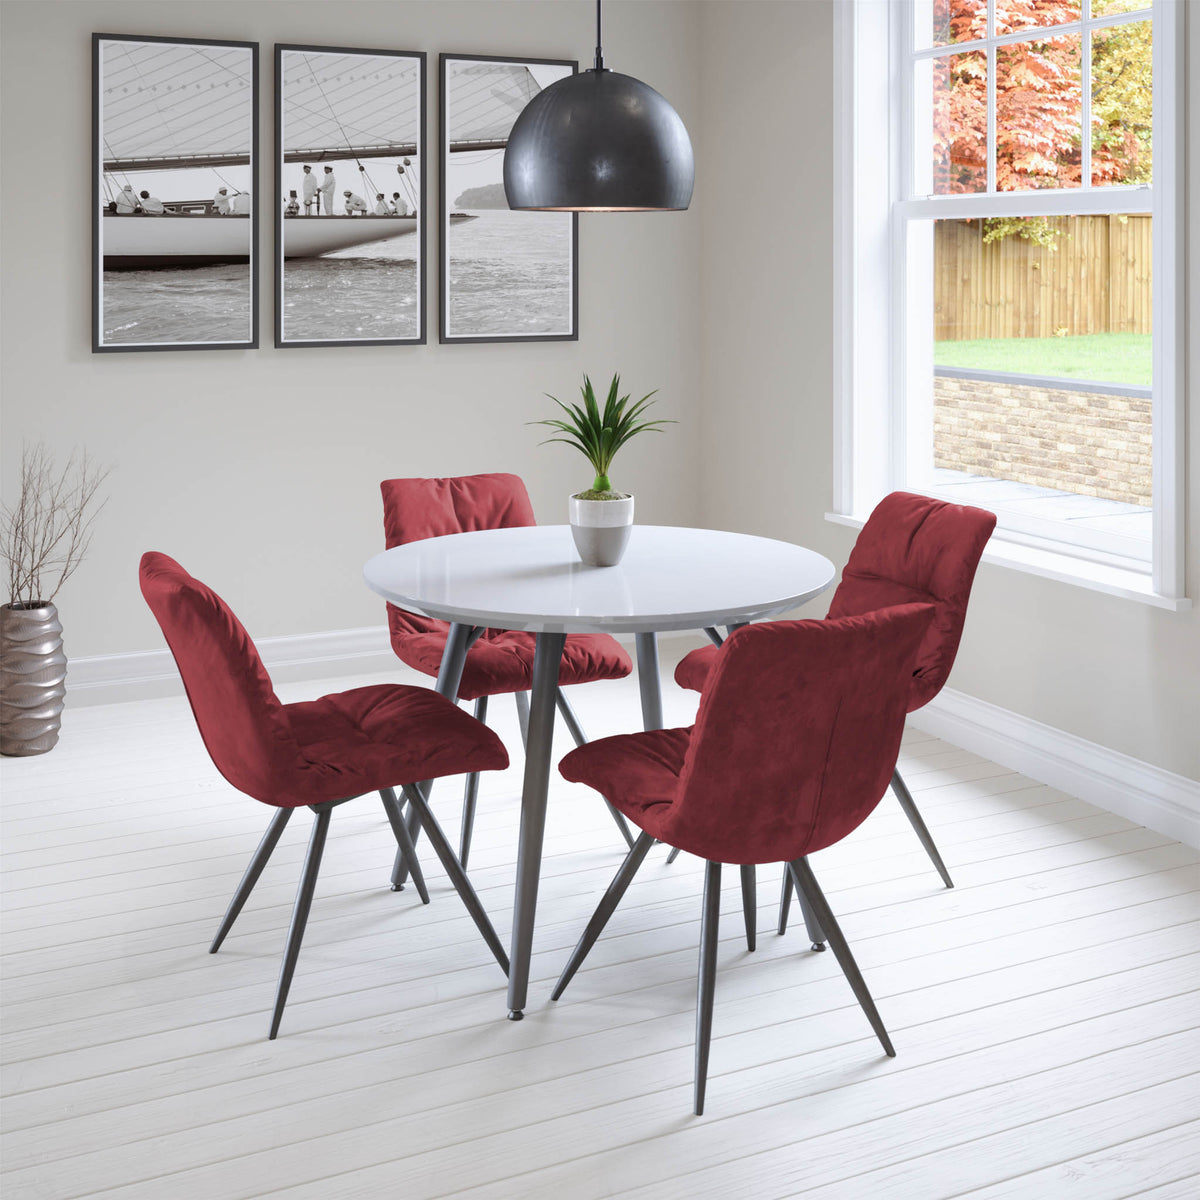 Paros Round Dining Table with 4 Addison Red Chairs